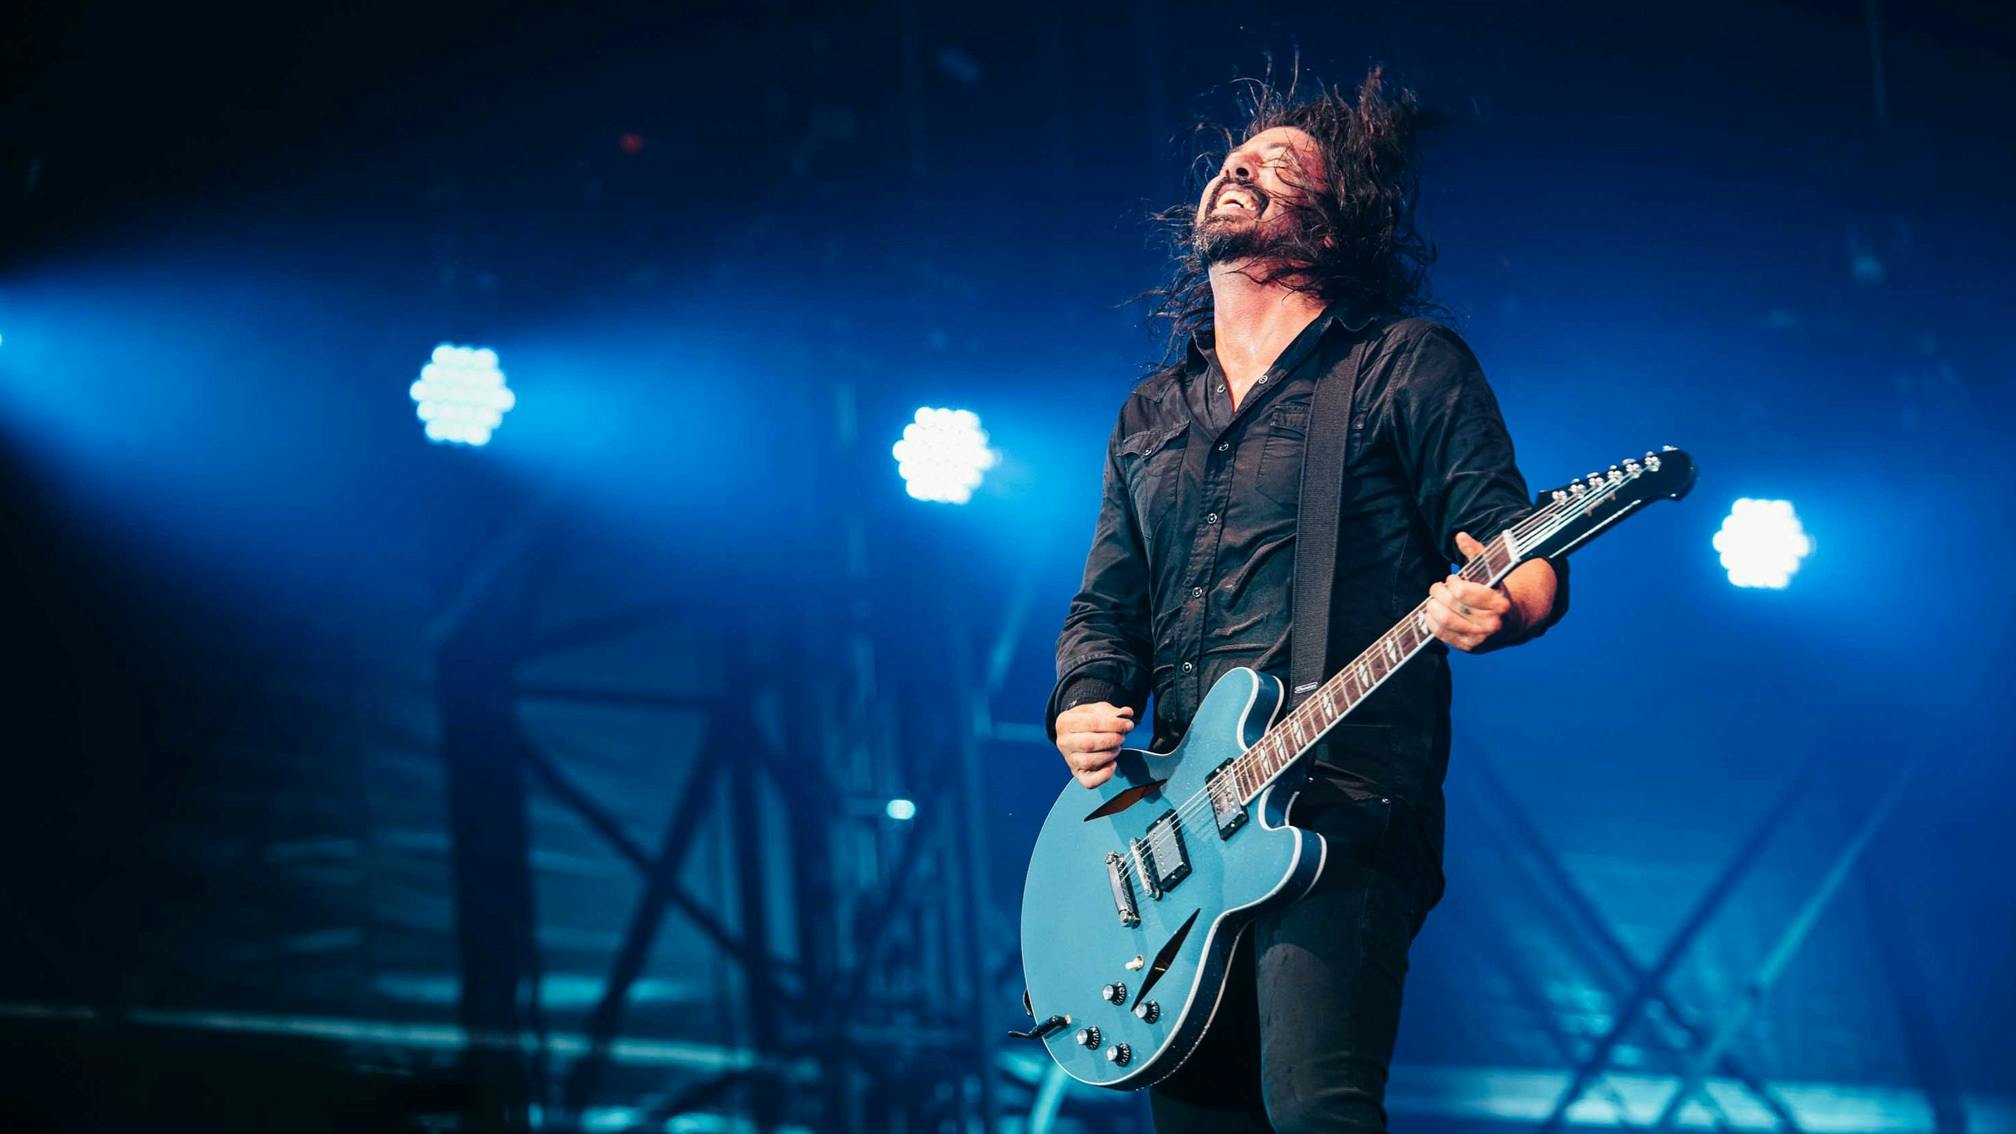 Foo Fighters are launching their own radio station with SiriusXM